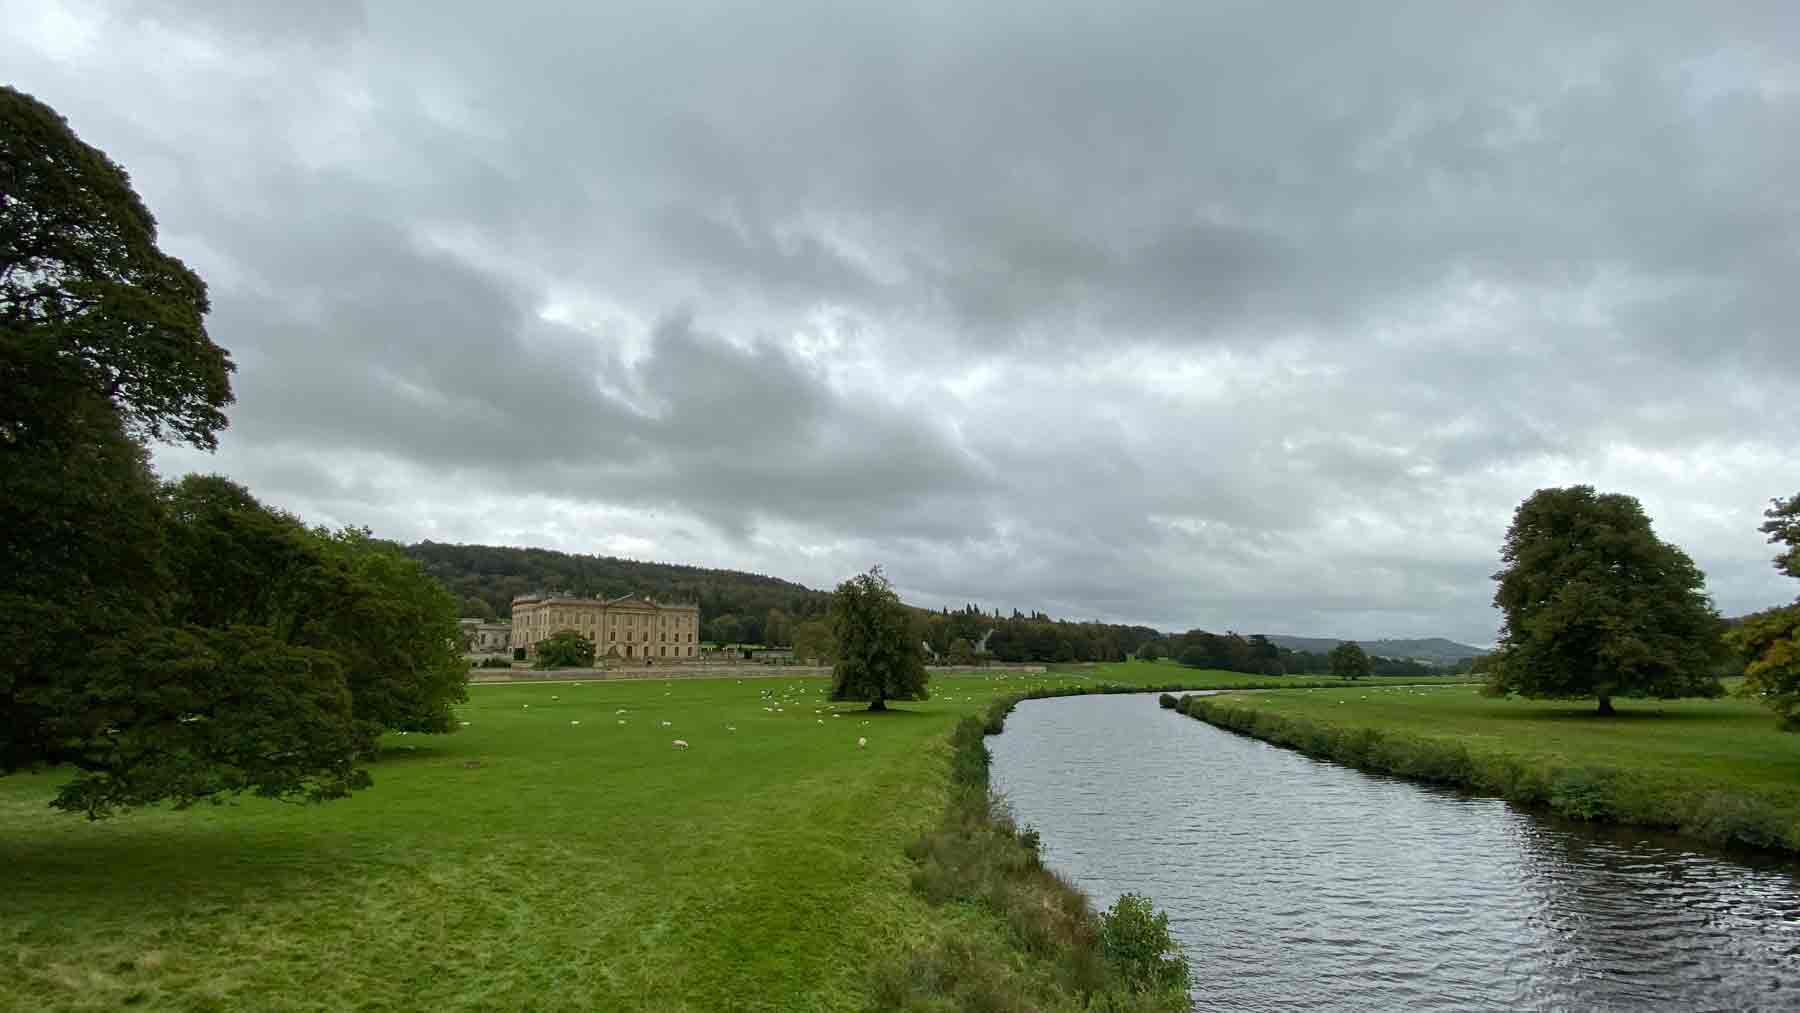 Chatsworth in the distance along the river as part of our exploration of Baslow, Peak District